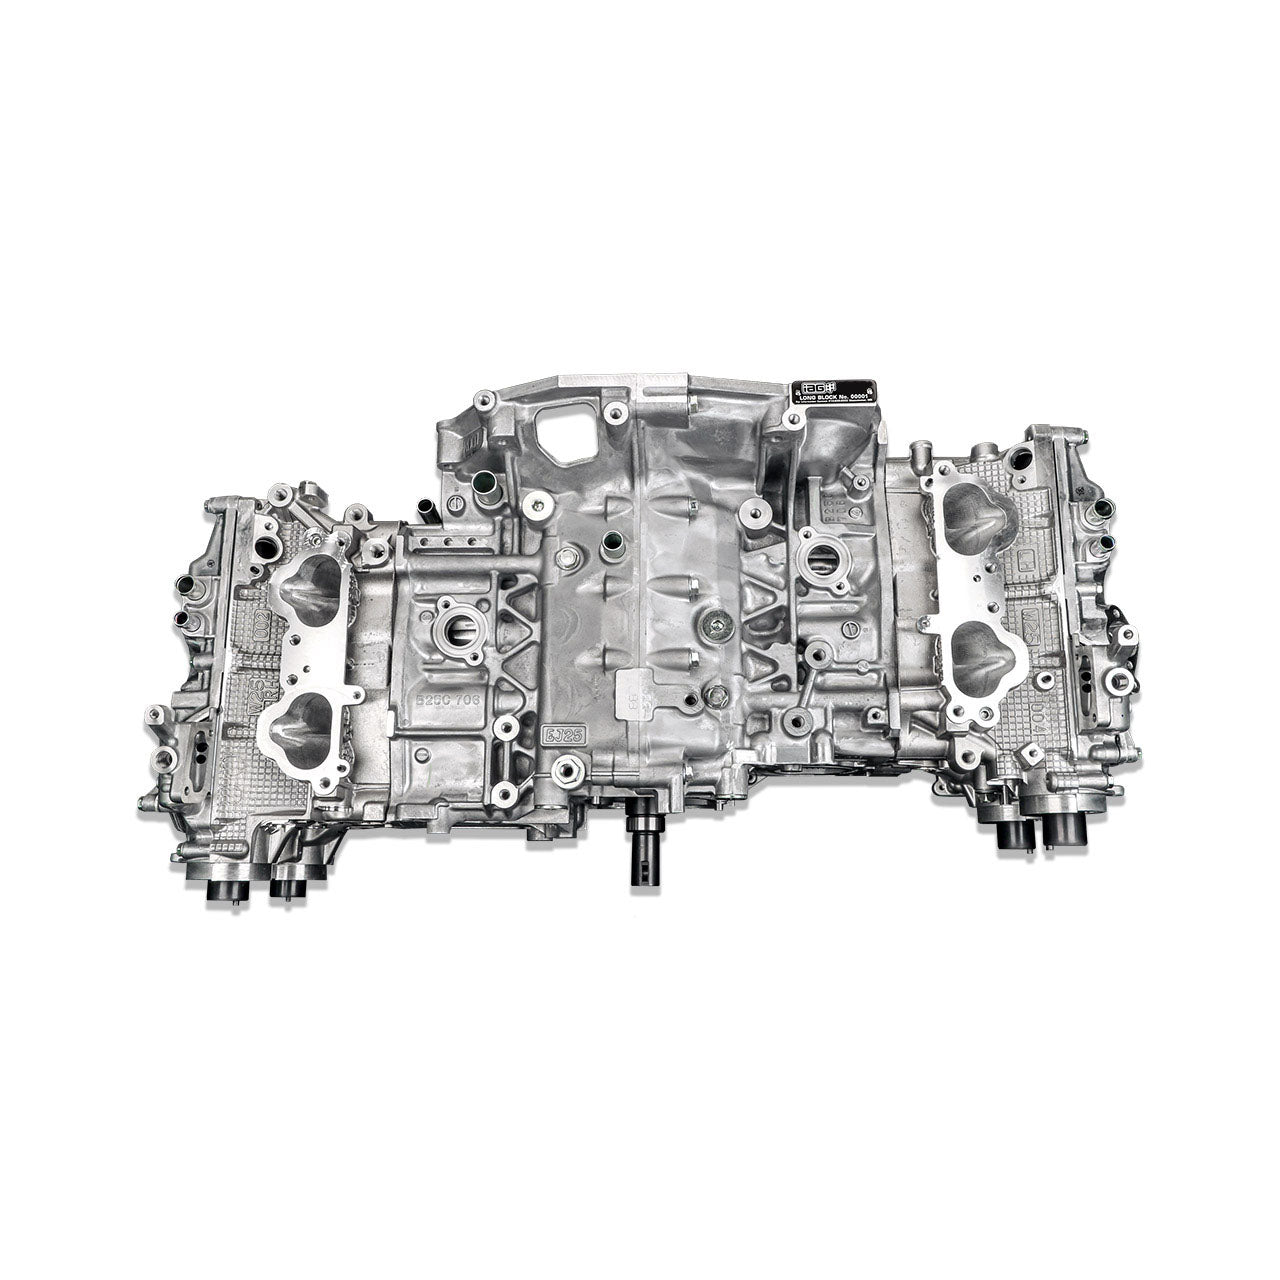 IAG 1150 Closed Deck Long Block Engine W/ IAG 1150 Heads / GSC S3 Camshafts For 06-14 WRX 06-13 FXT 07-09 LGT (REQUIRES Standalone Engine Management May Not Be Compatible With AVCS)